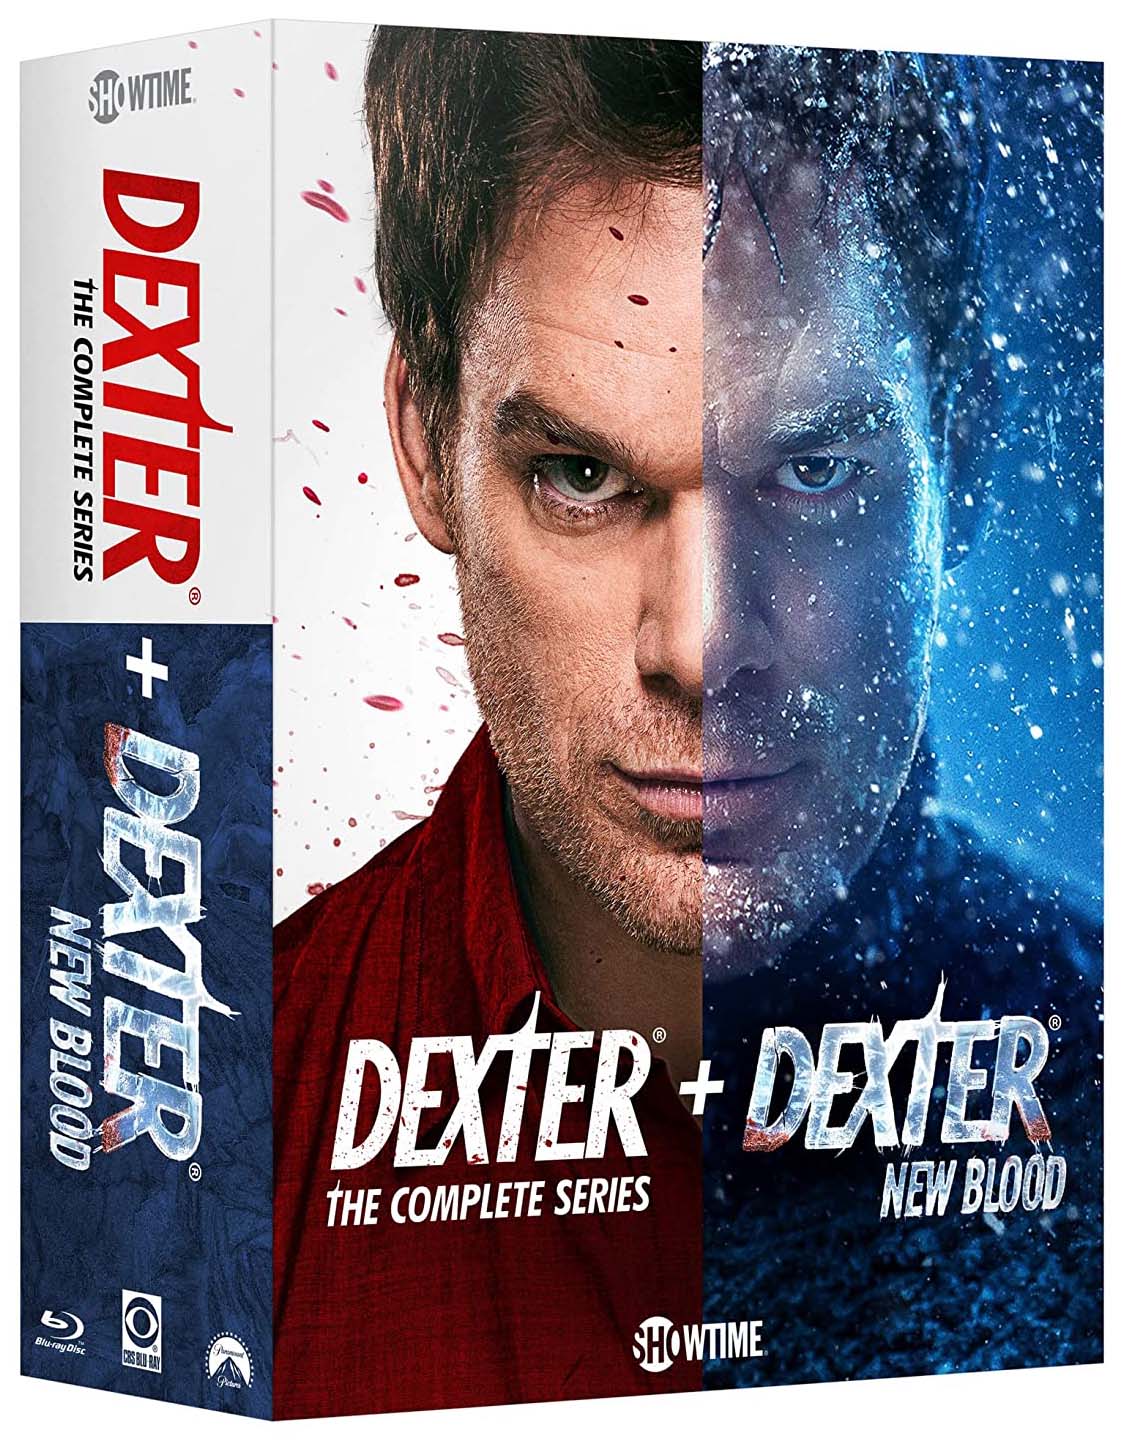 Dexter-The-Complete-Series-New-Blood-Blu-ray